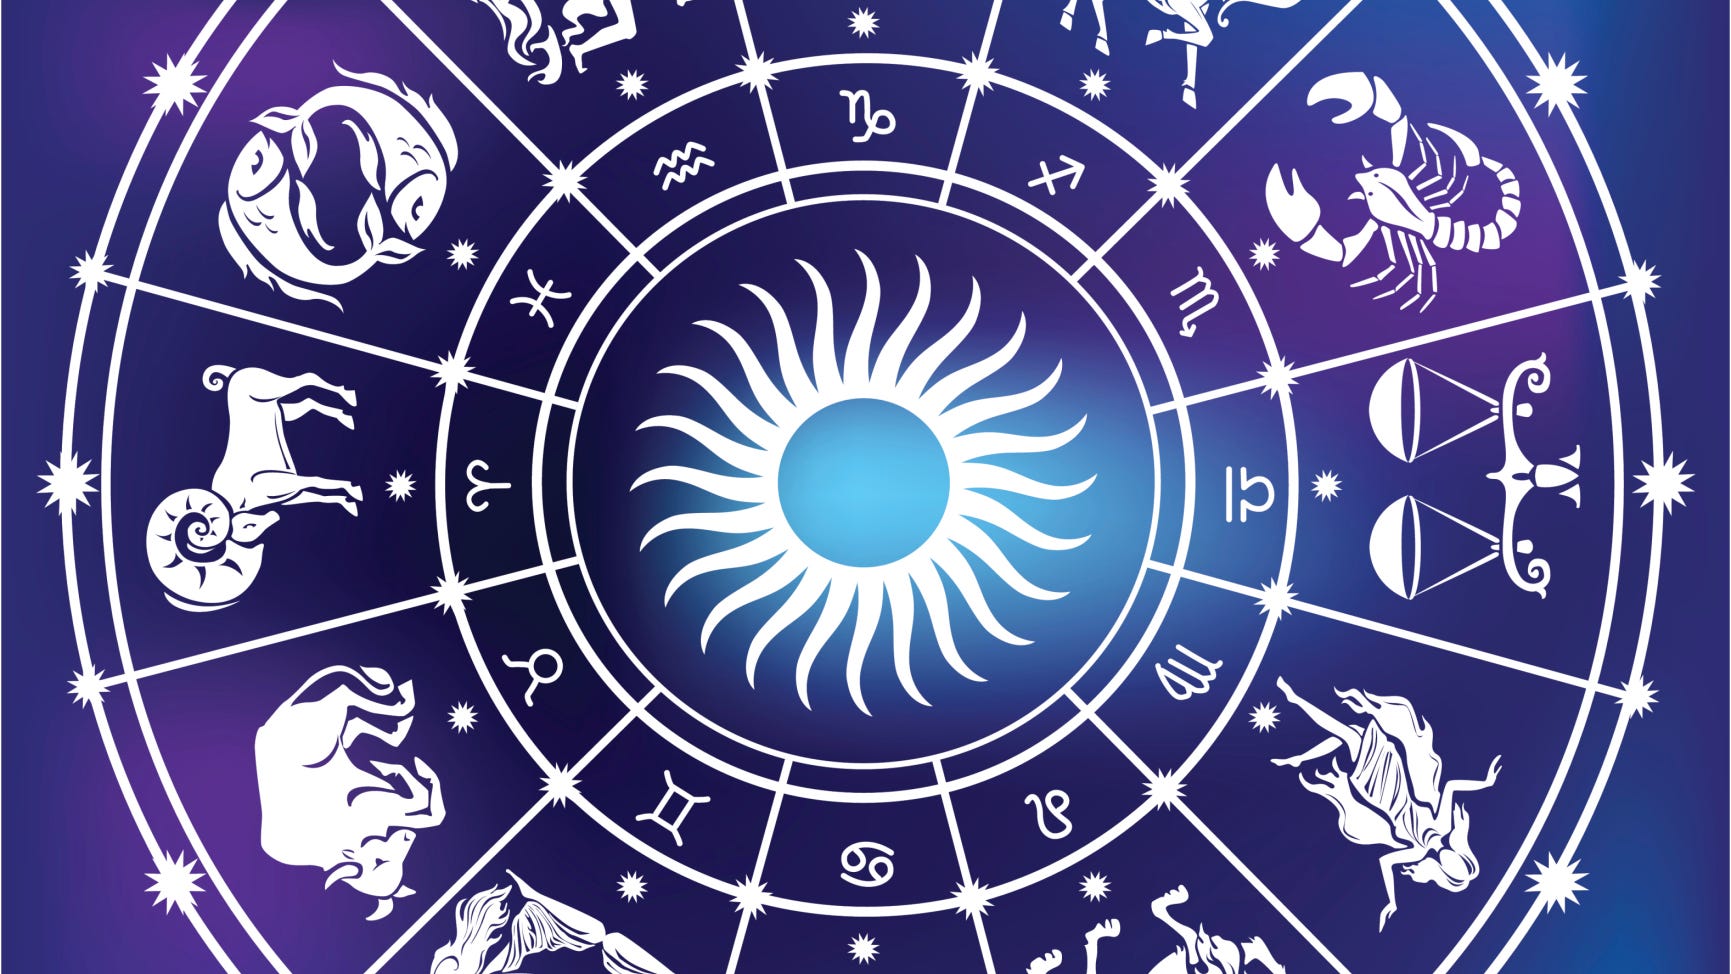 horoscope today march 2 2022